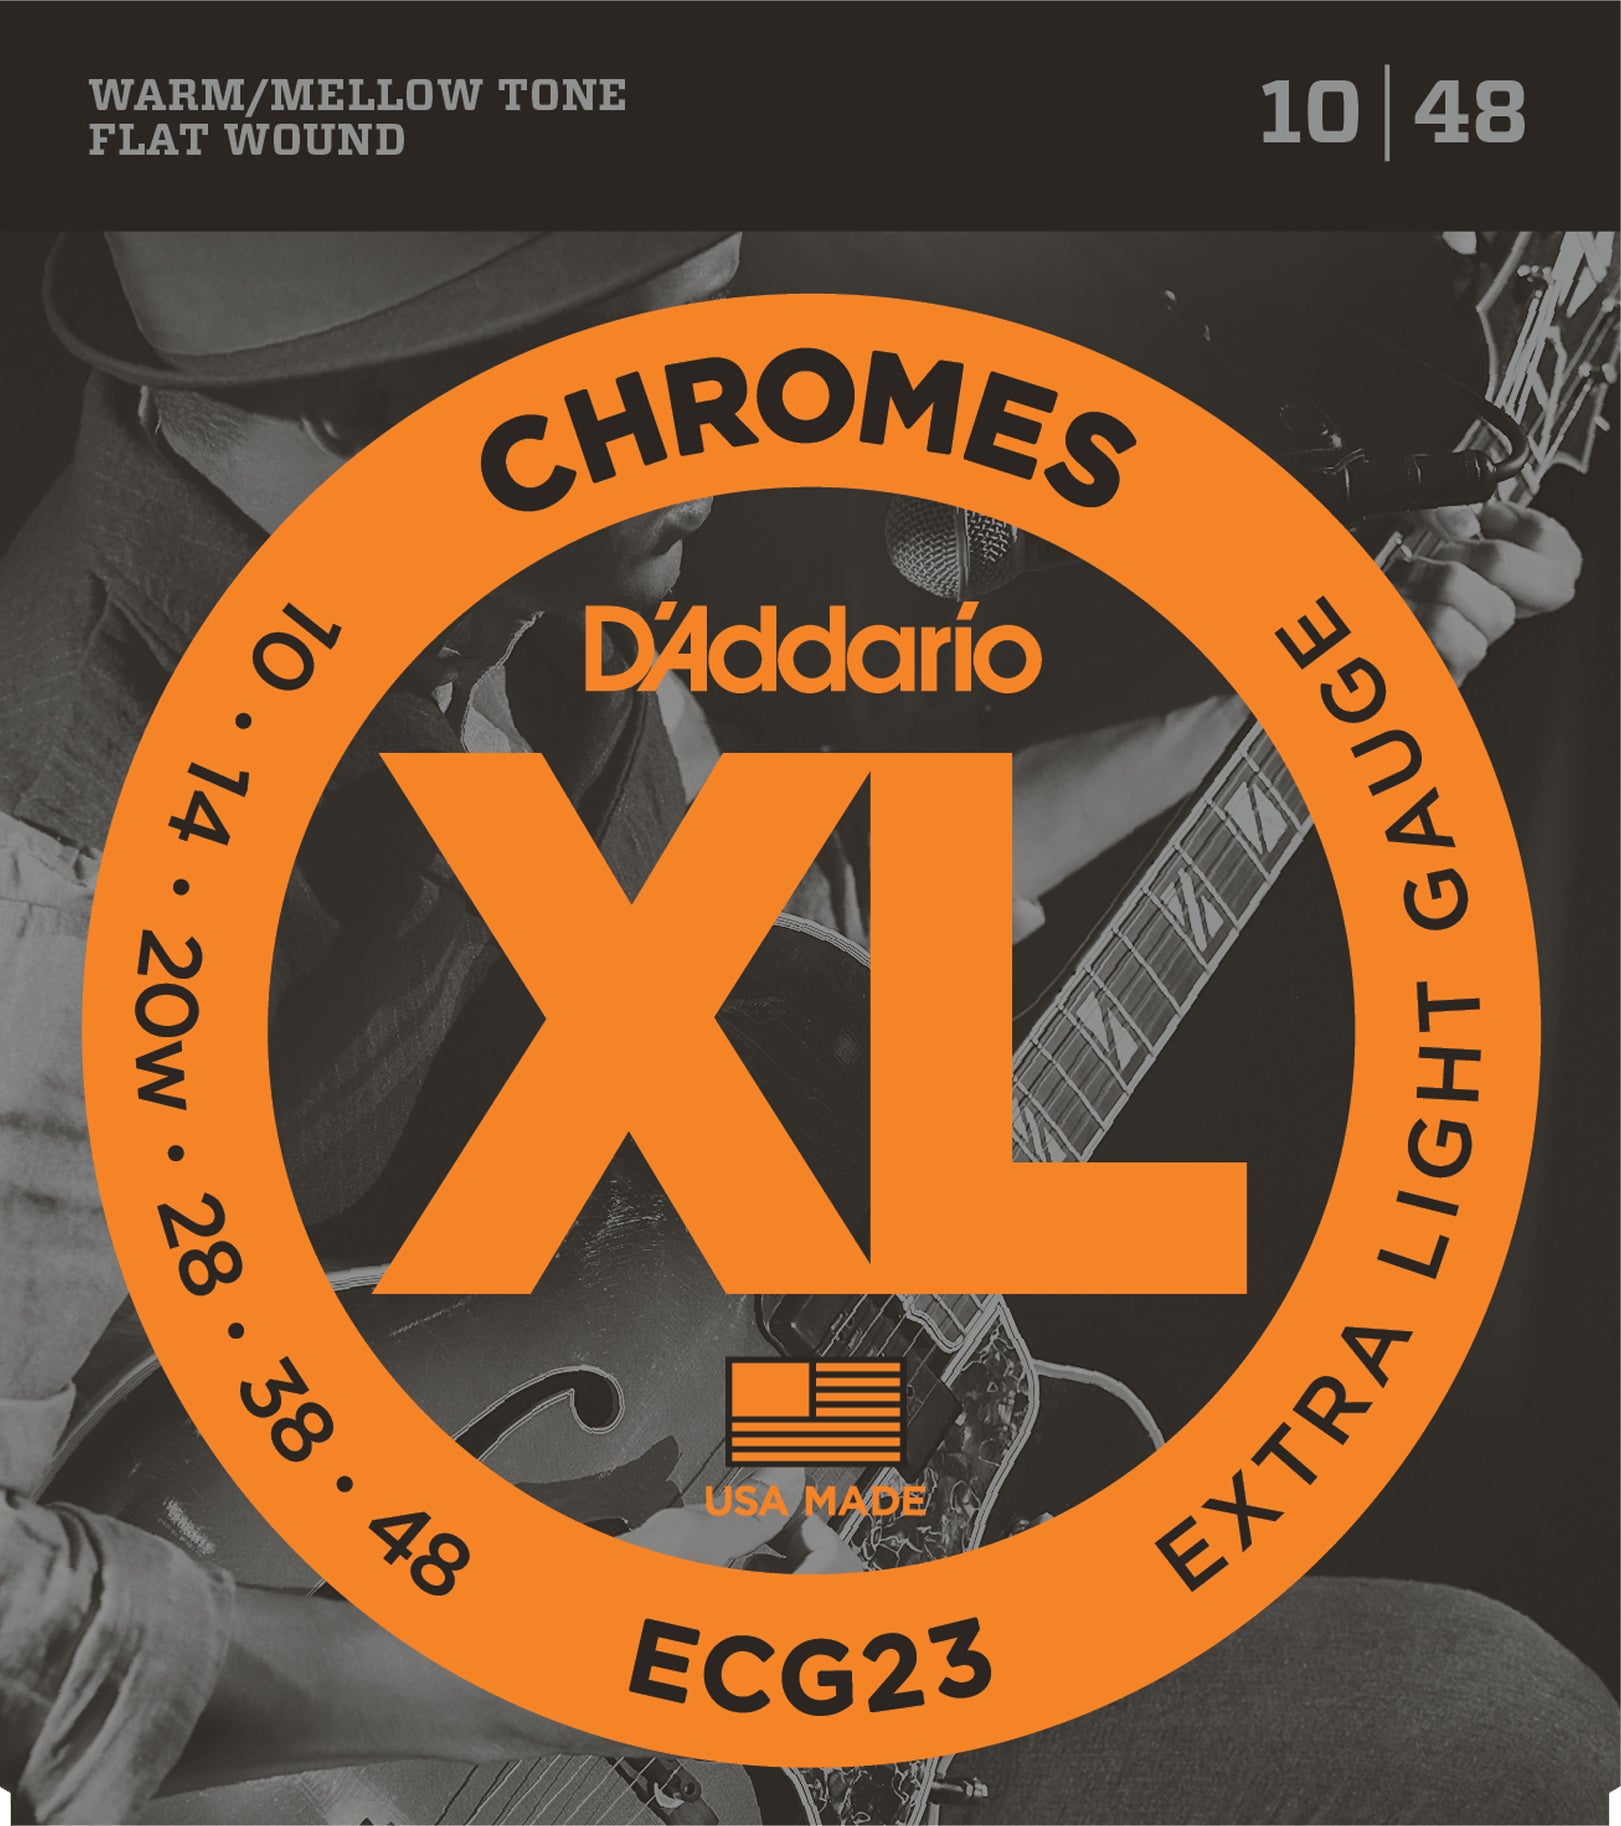 D'ADDARIO CHROMES FLAT WOUND ELECTRIC GUITAR STRINGS EXTRA LIGHT 10-48